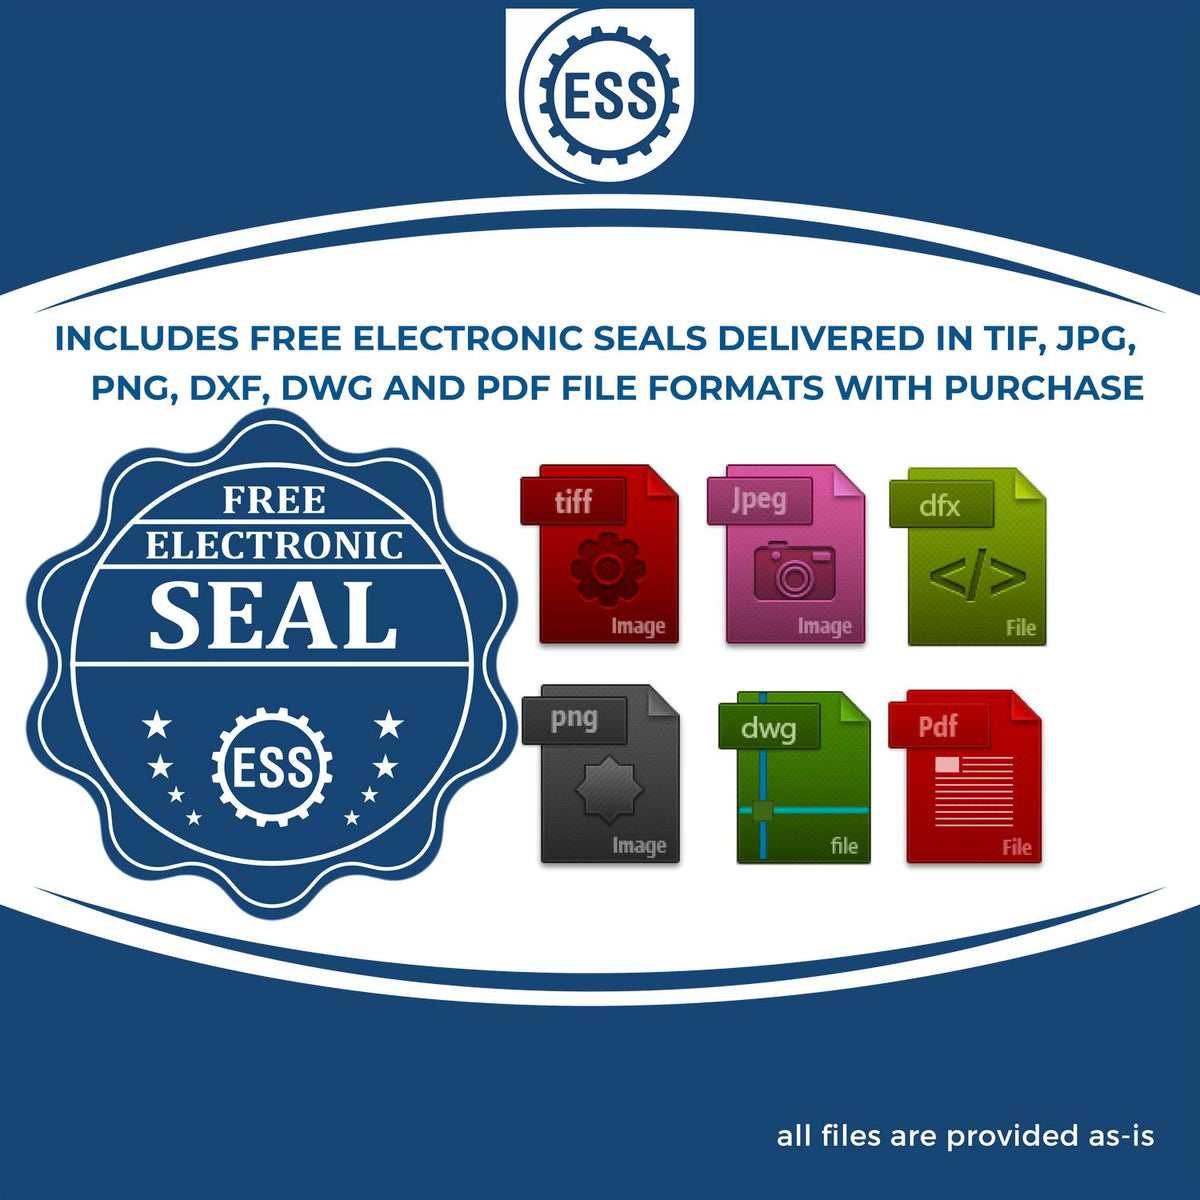 An infographic for the free electronic seal for the Connecticut Professional Engineer Seal Stamp illustrating the different file type icons such as DXF, DWG, TIF, JPG and PNG.